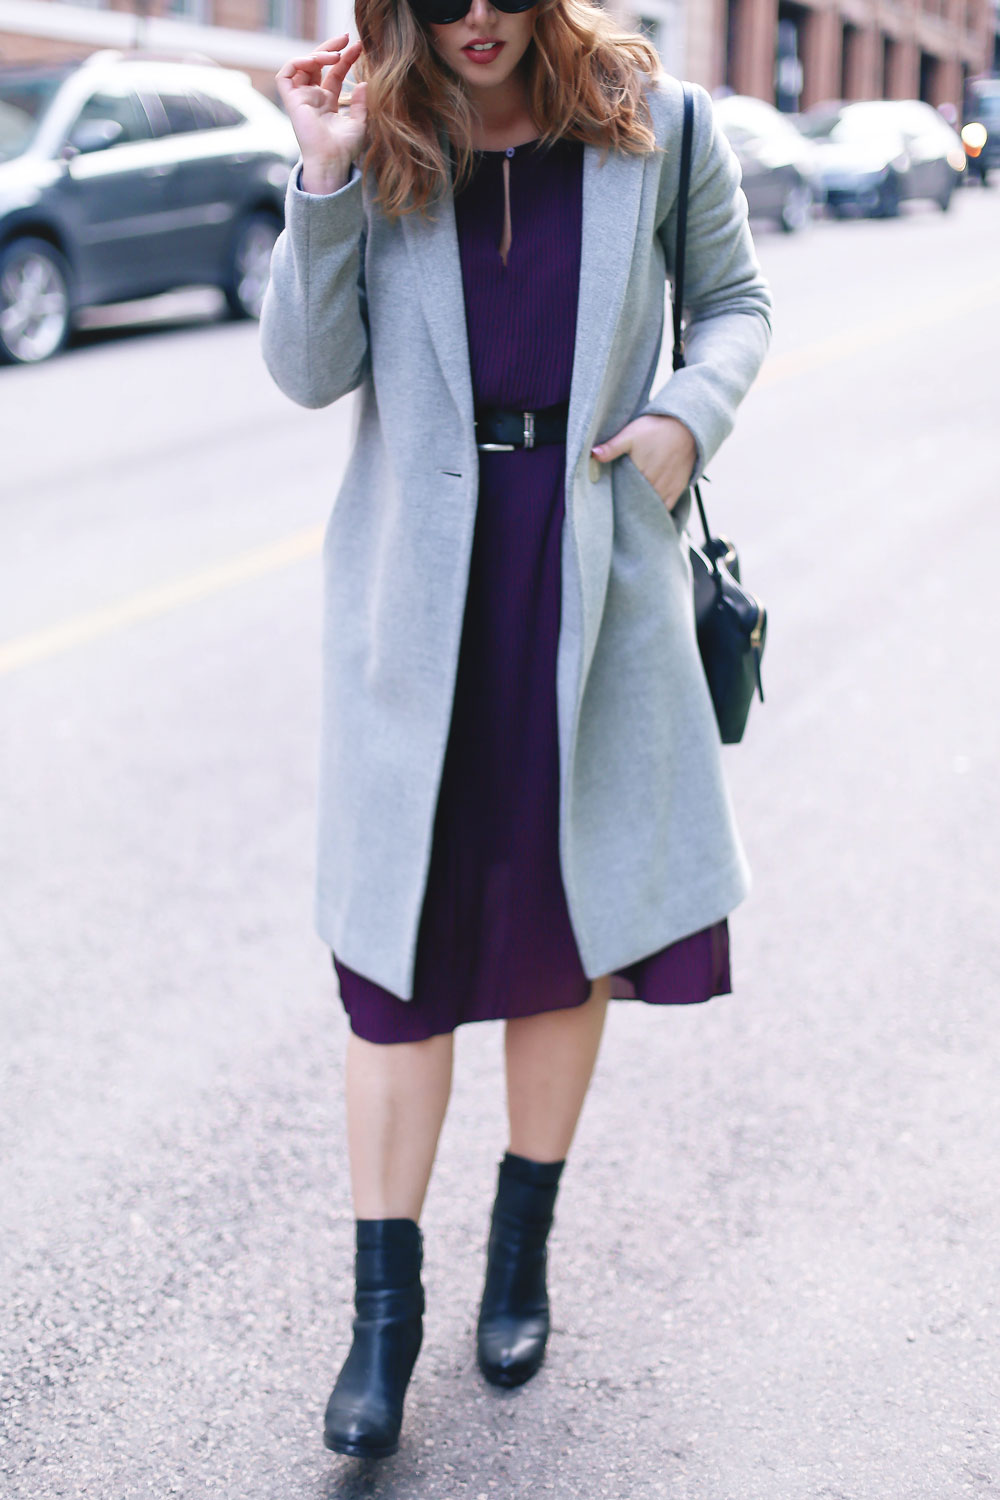 How to transition your style from winter into spring in an Aritzia dress, Aritzia wool coat, Aritzia black leather bag, Frye ankle boots